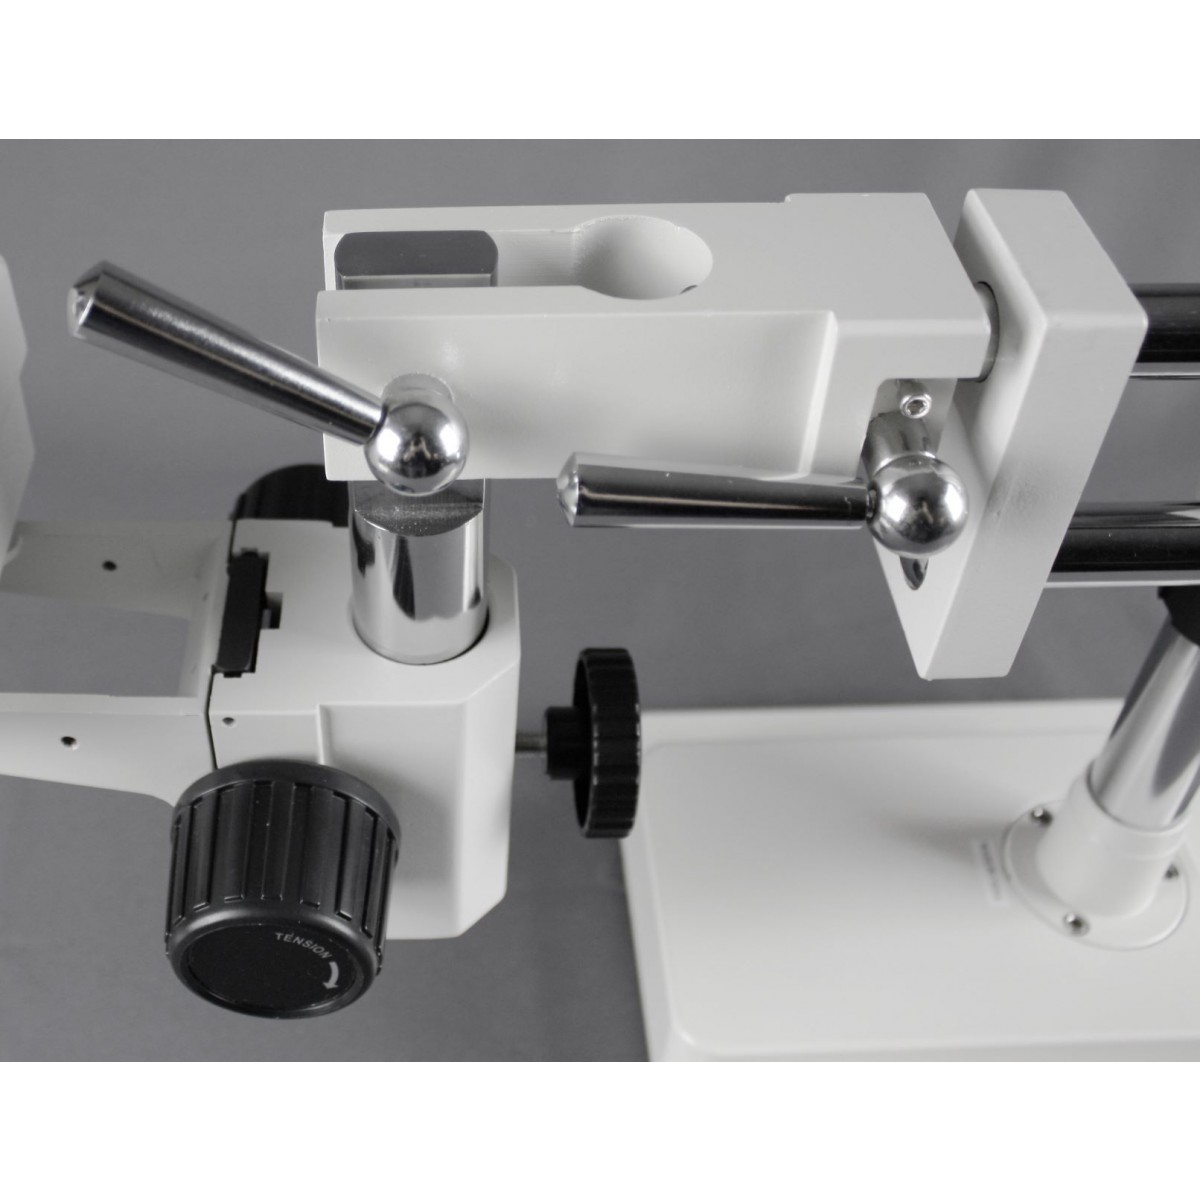 Includes Pair of 10x Eyepieces Parco PZF Zoom Stereo 0.7X-4.5X Trinocular Microscope Head 